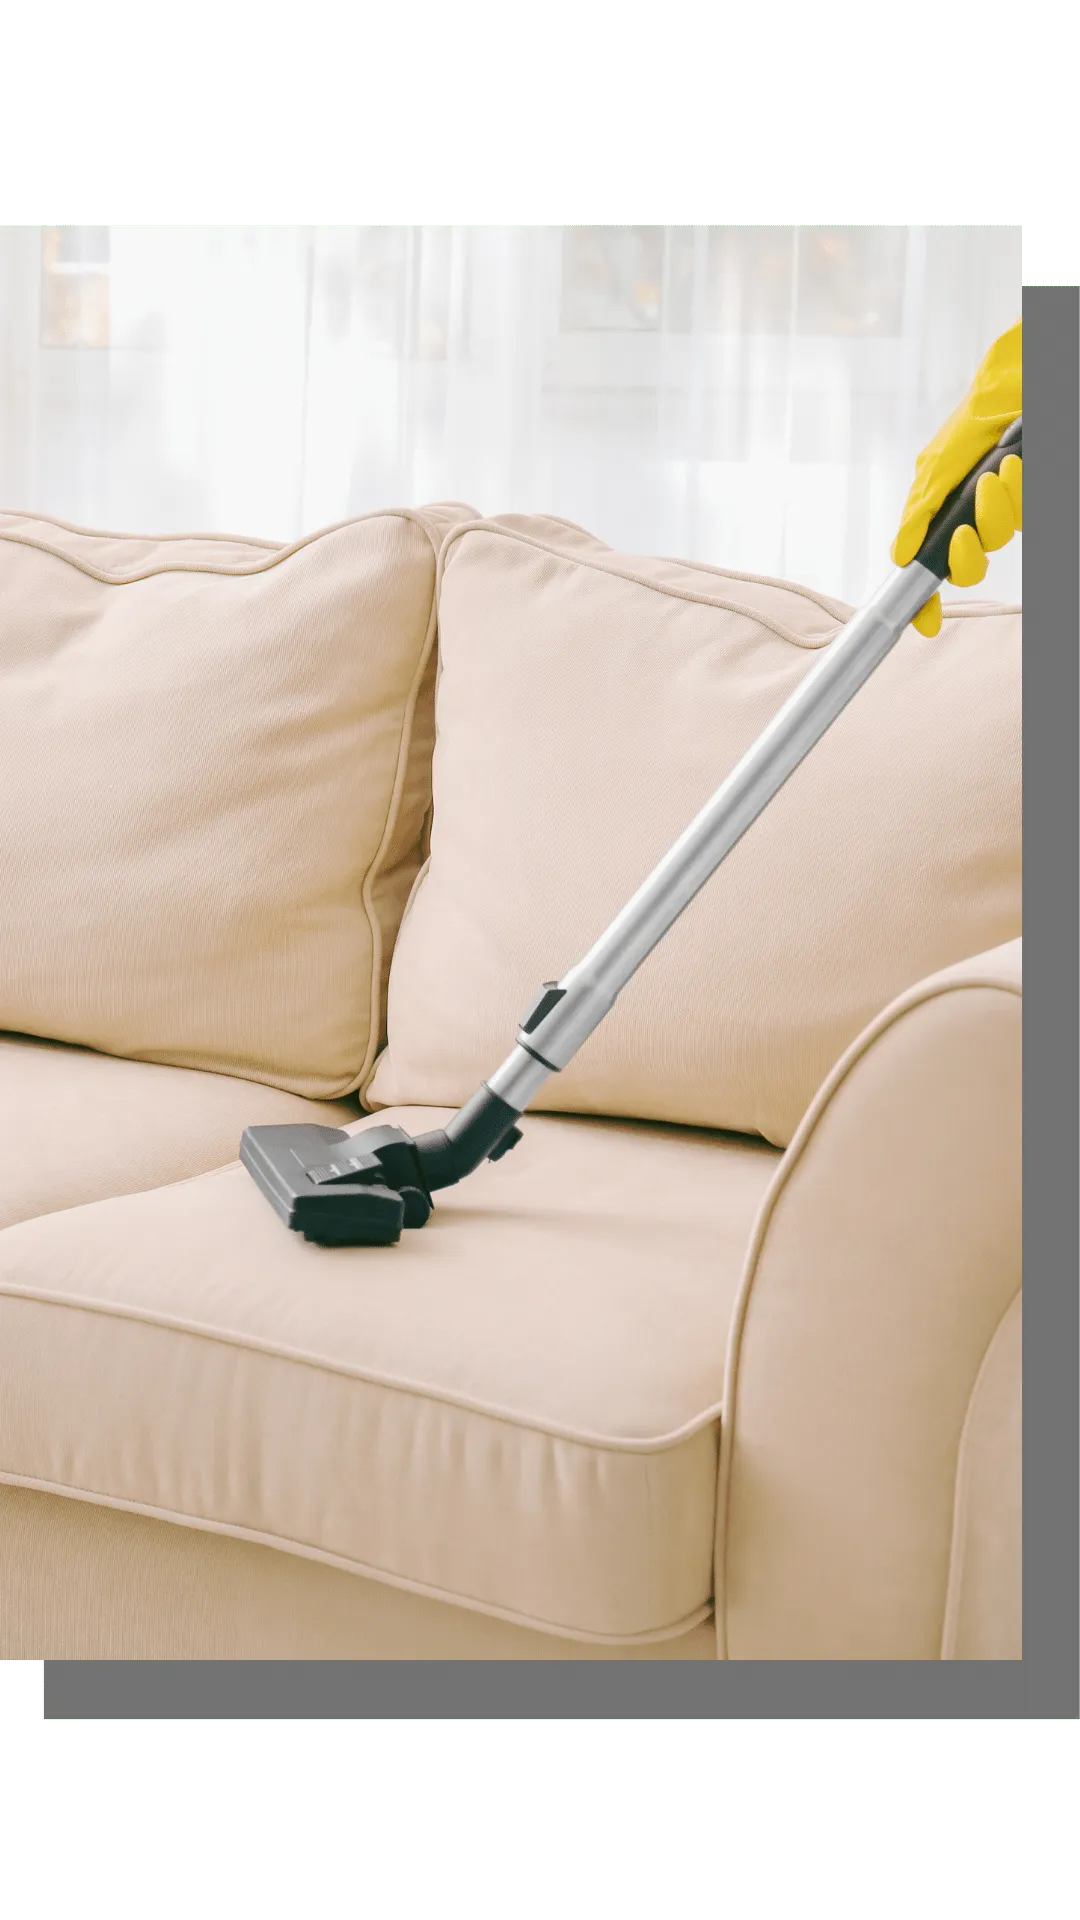 upholstery cleaning equipment restoring couch's upholstery fabric